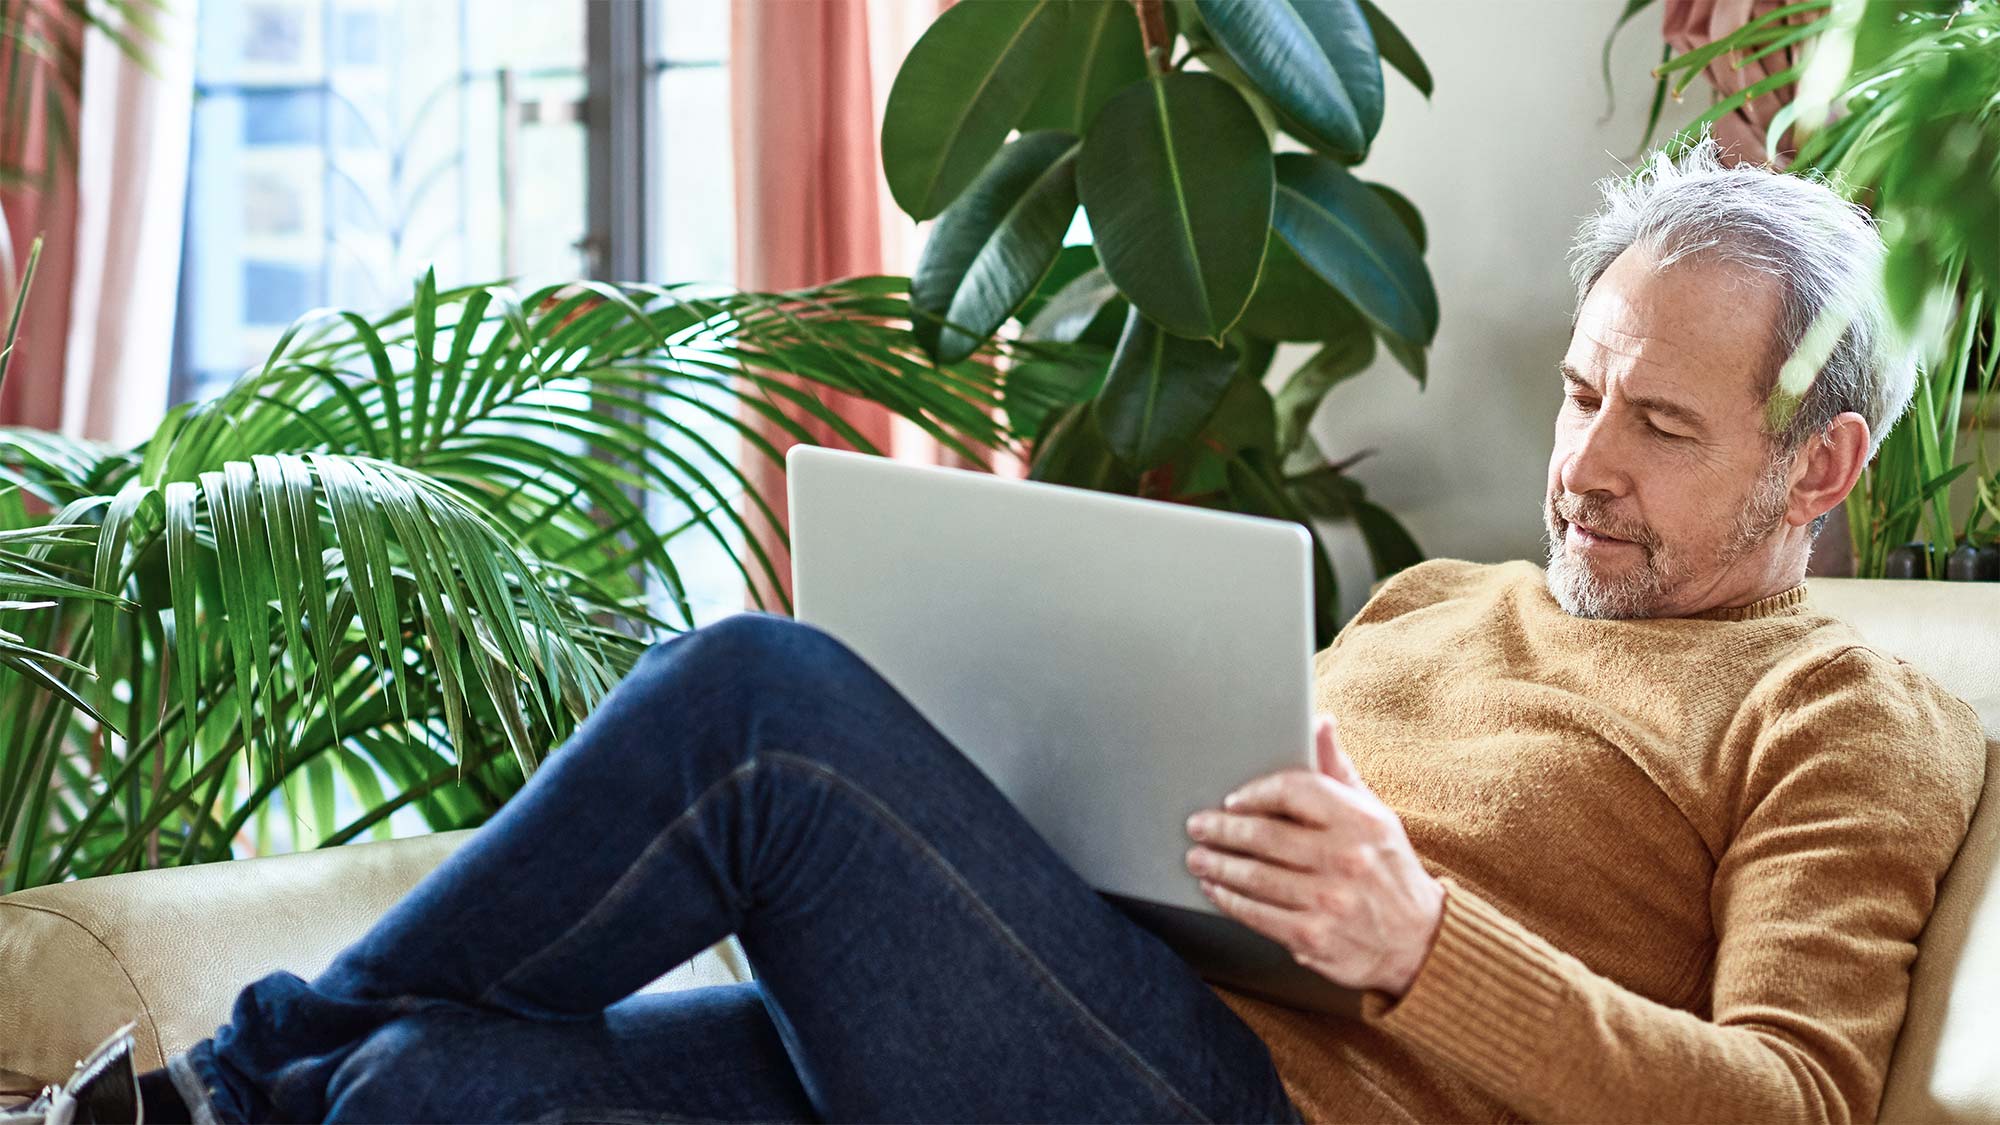 A man in a sweater is sitting on a sofa in front of indoor plants and is reading on his laptop. Many people are concerned that the new mobile communications standard carries health risks. We clarify and show reassuring scientific evidence.